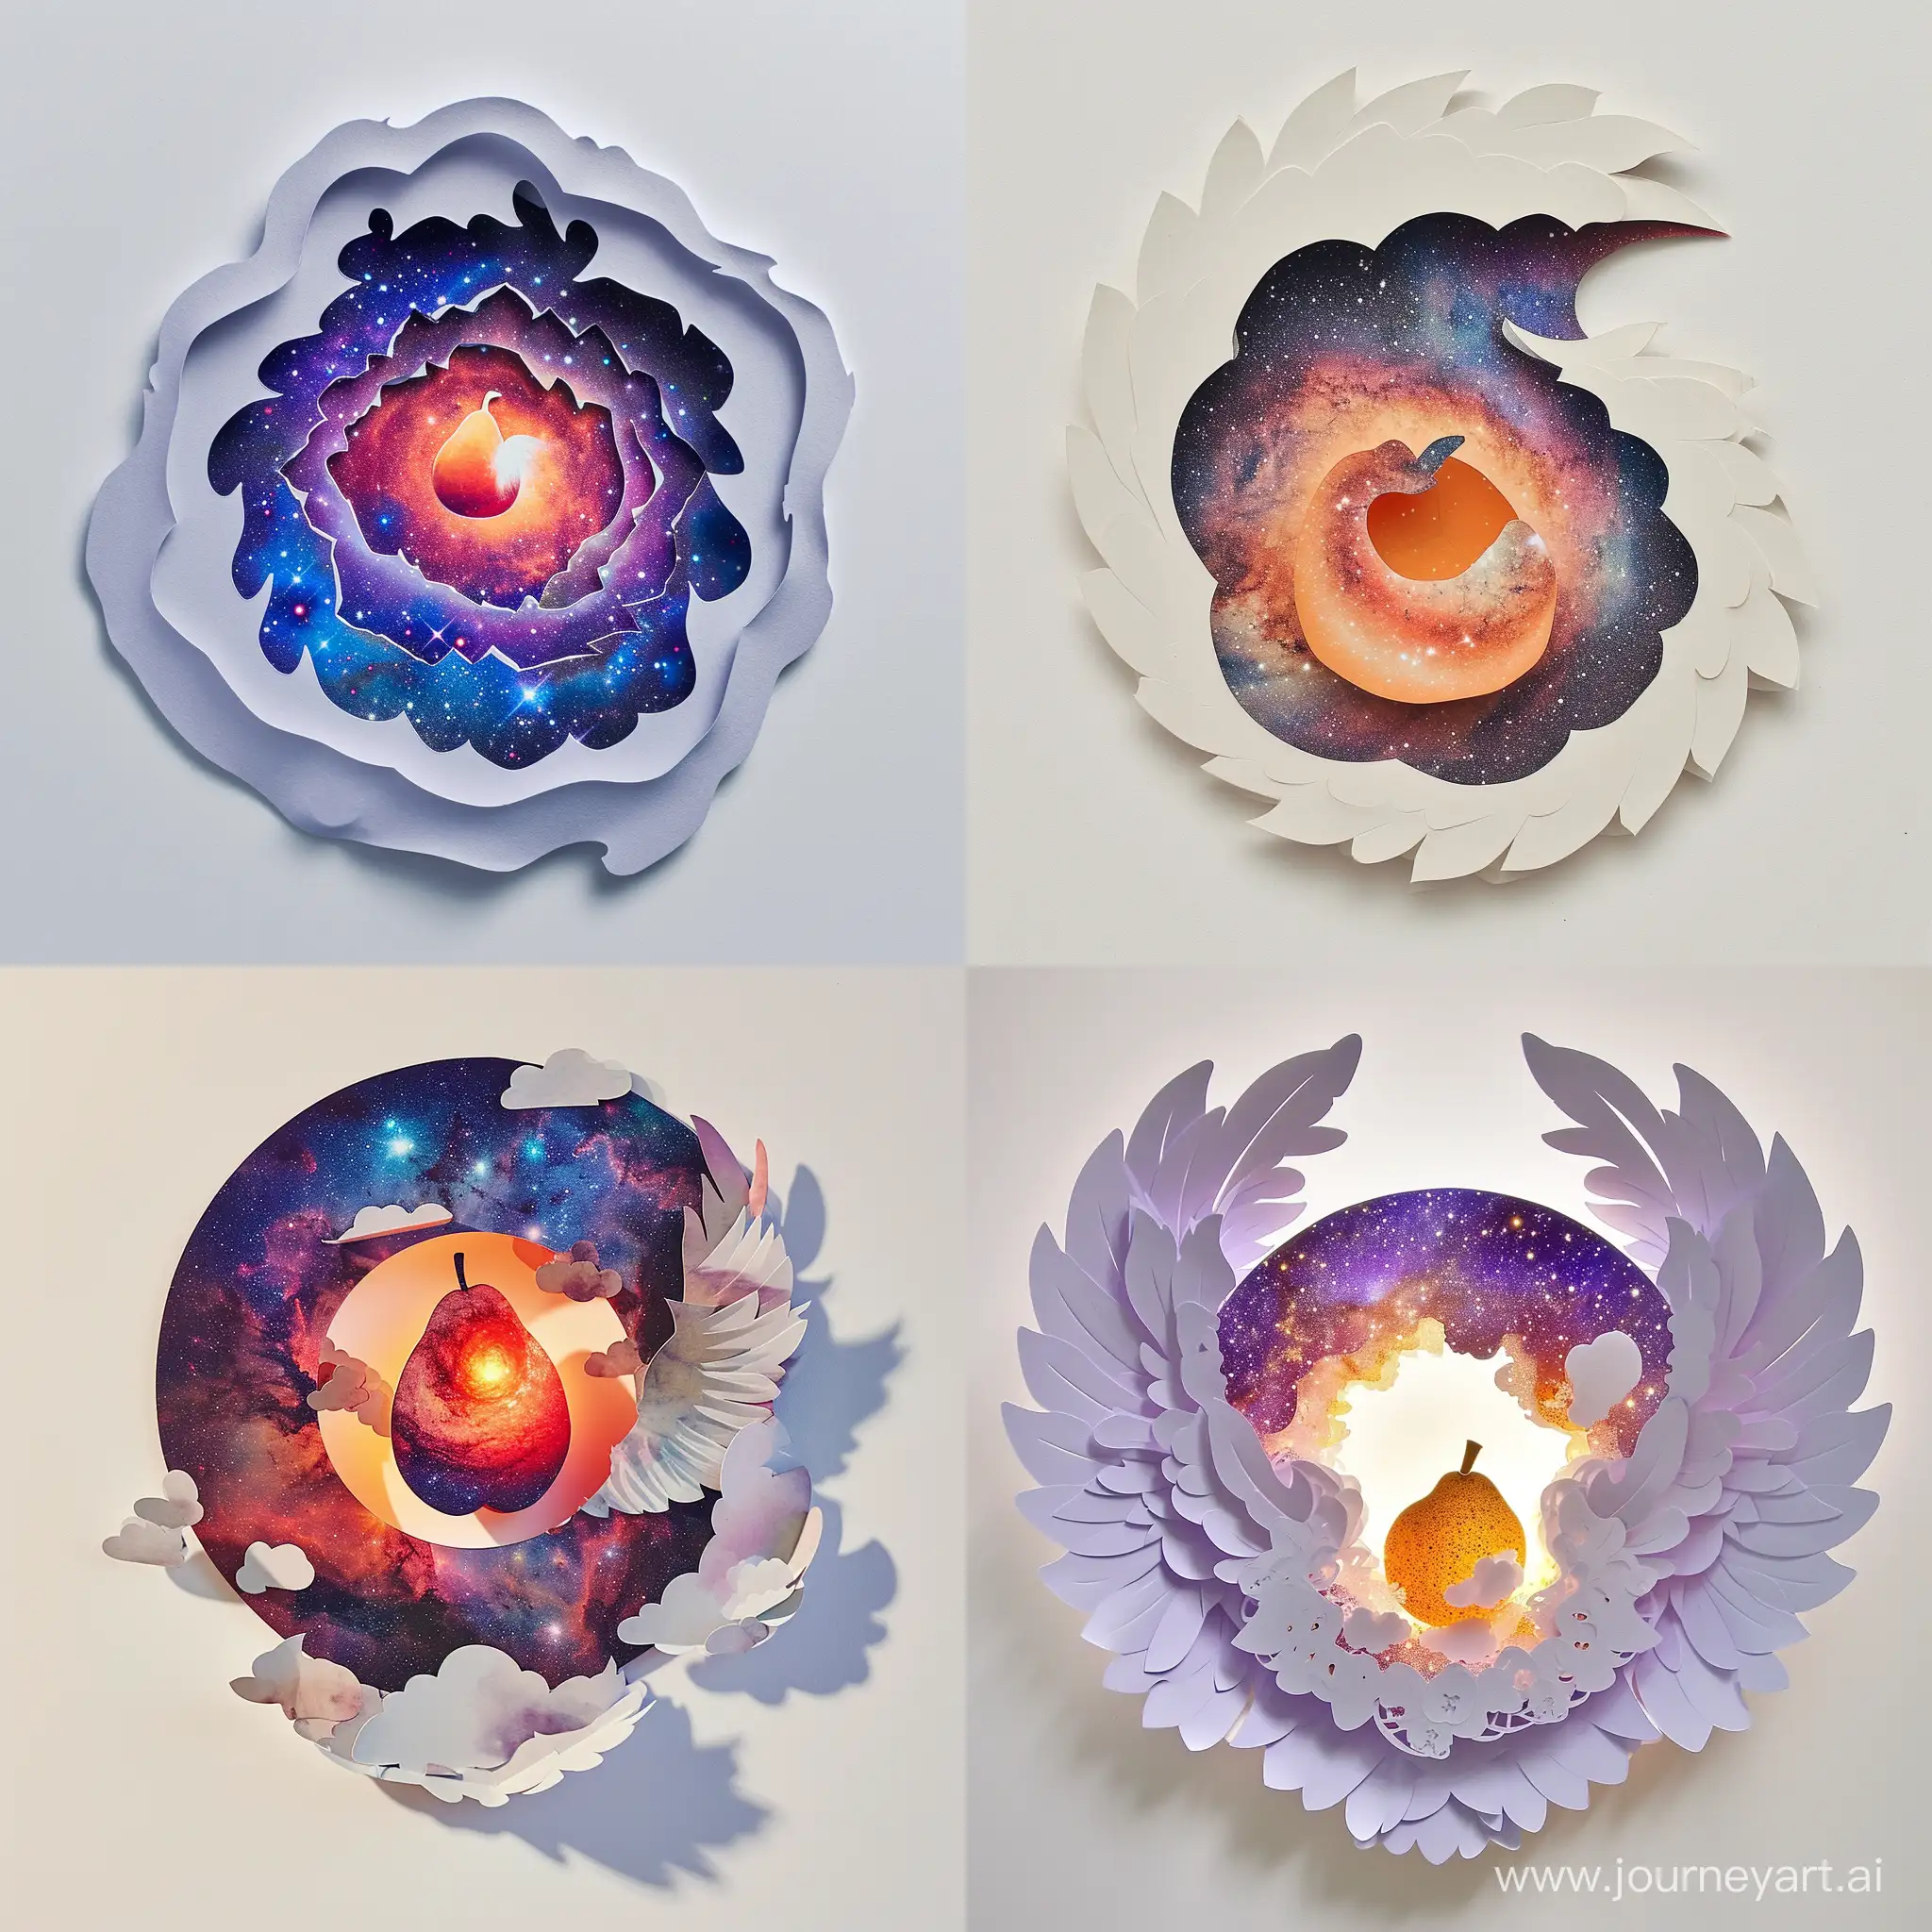 Forbidden-Fruit-in-Angelic-Galaxy-Paper-Cutout-Double-Exposure